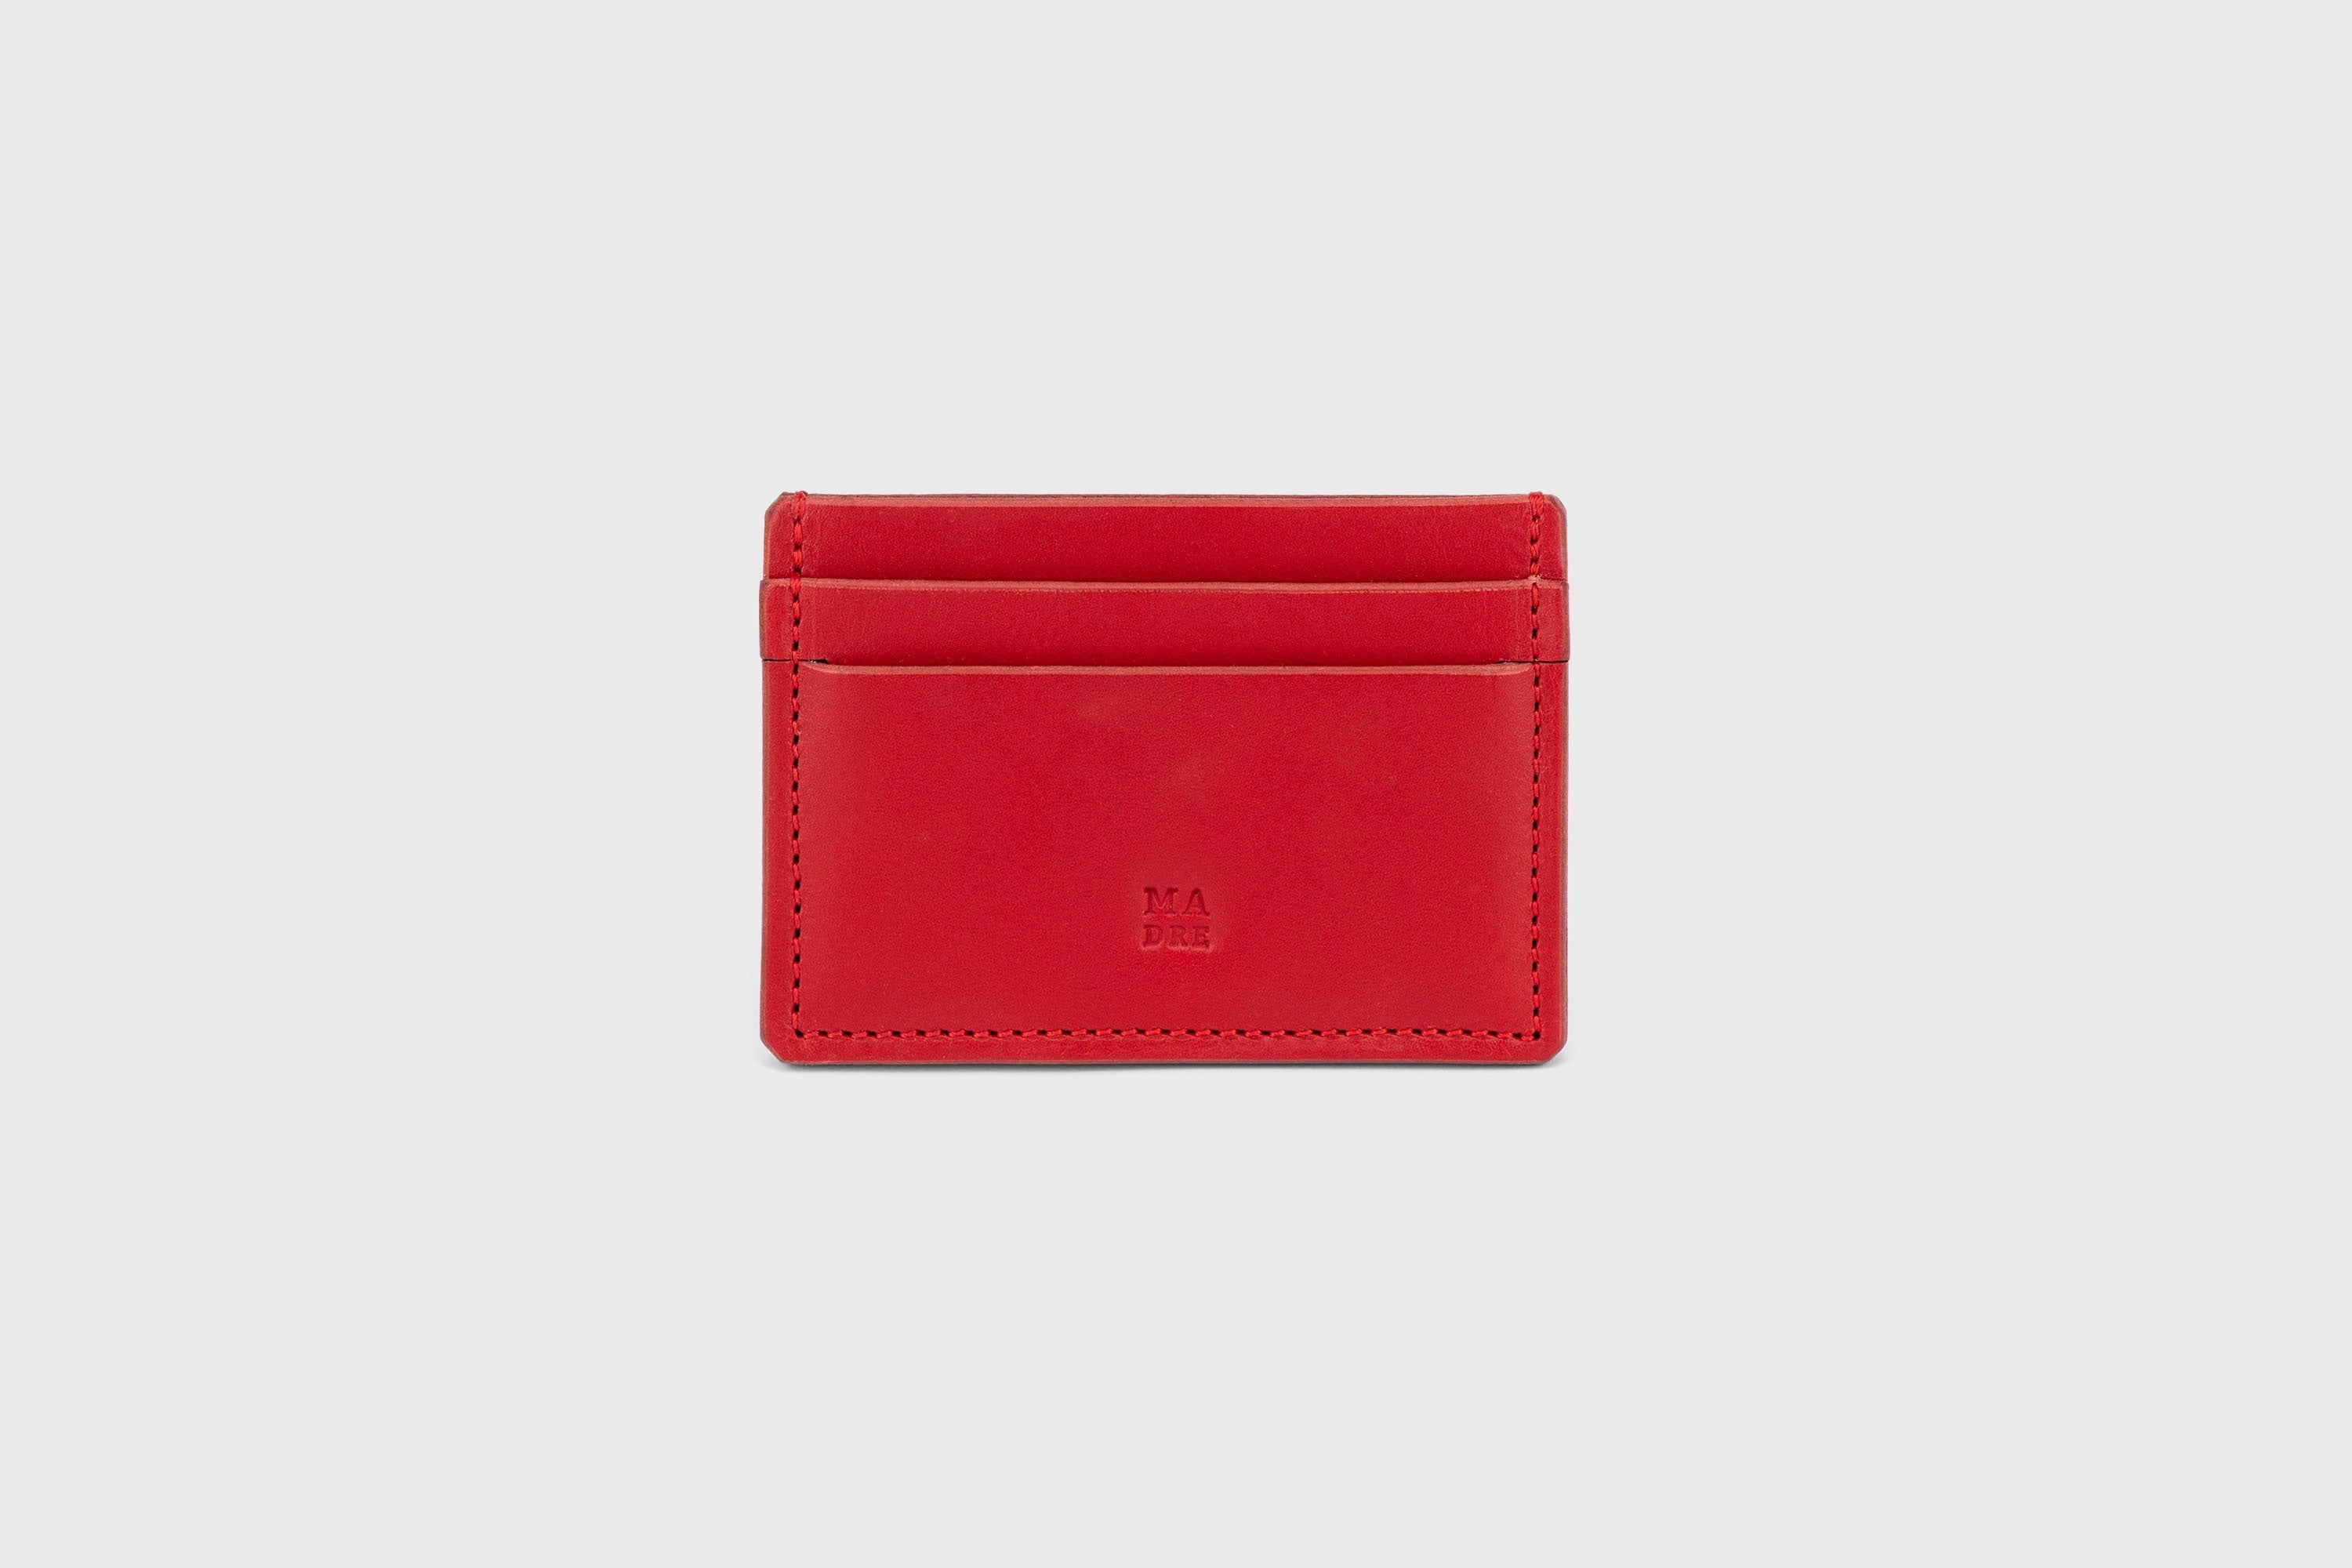 Credit Card Wallet in Red Leather Vachetta Vegetable Tanned Leather Handmade and Sleek Design by Atelier Madre Manuel Dreesmann Barcelona Spain